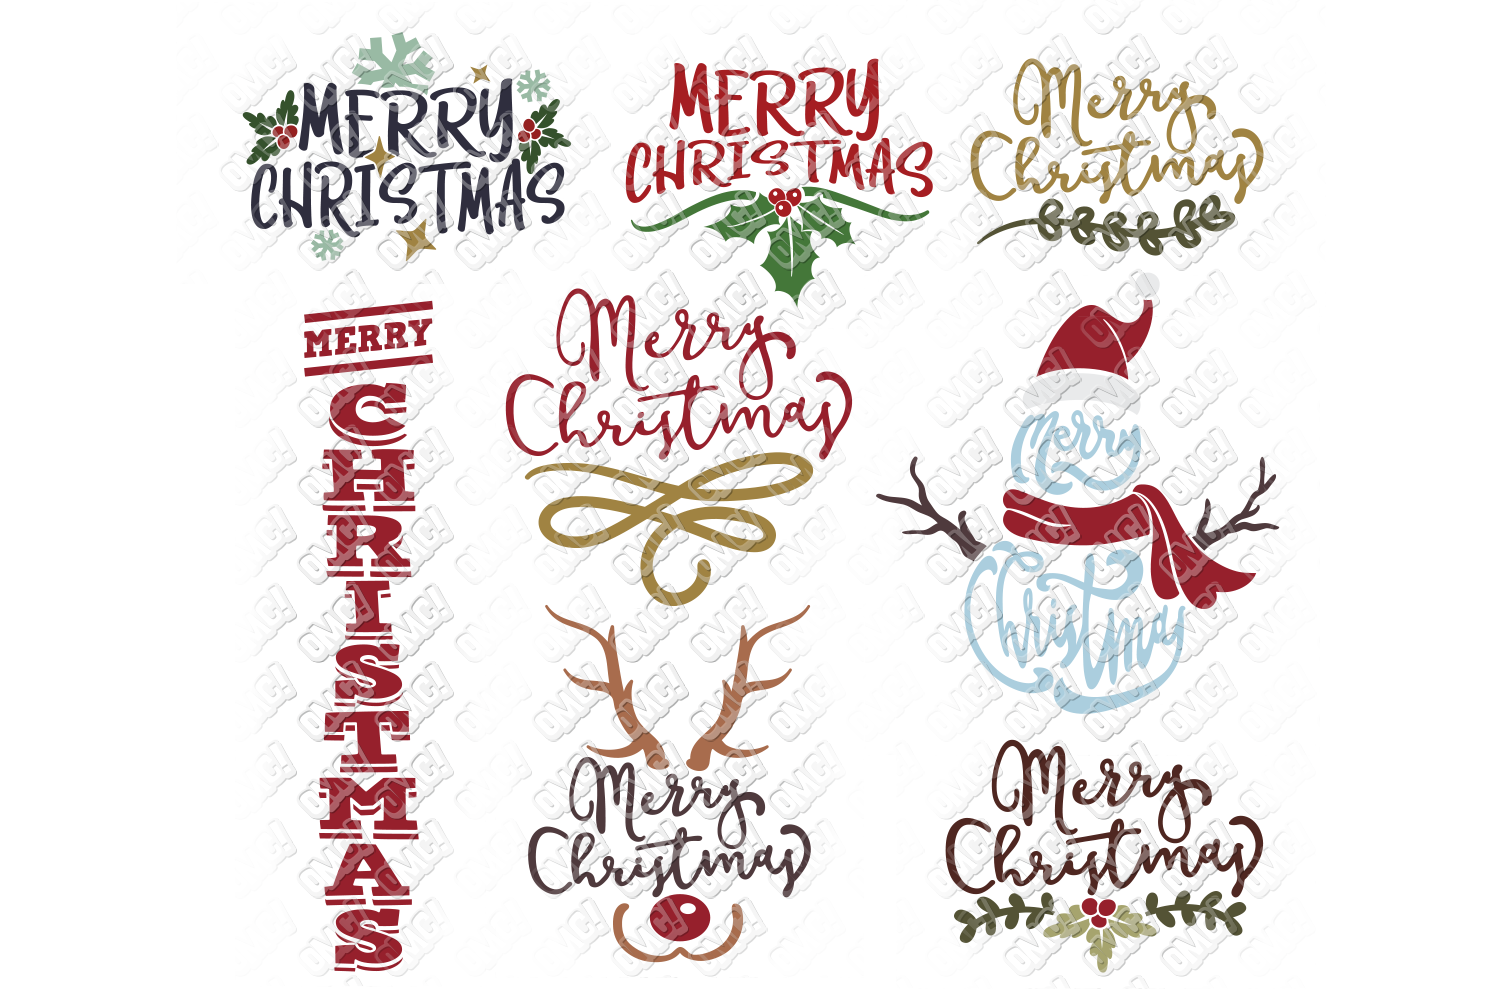 Merry Christmas SVG Bundle in SVG, DXF, PNG, EPS, JPEG